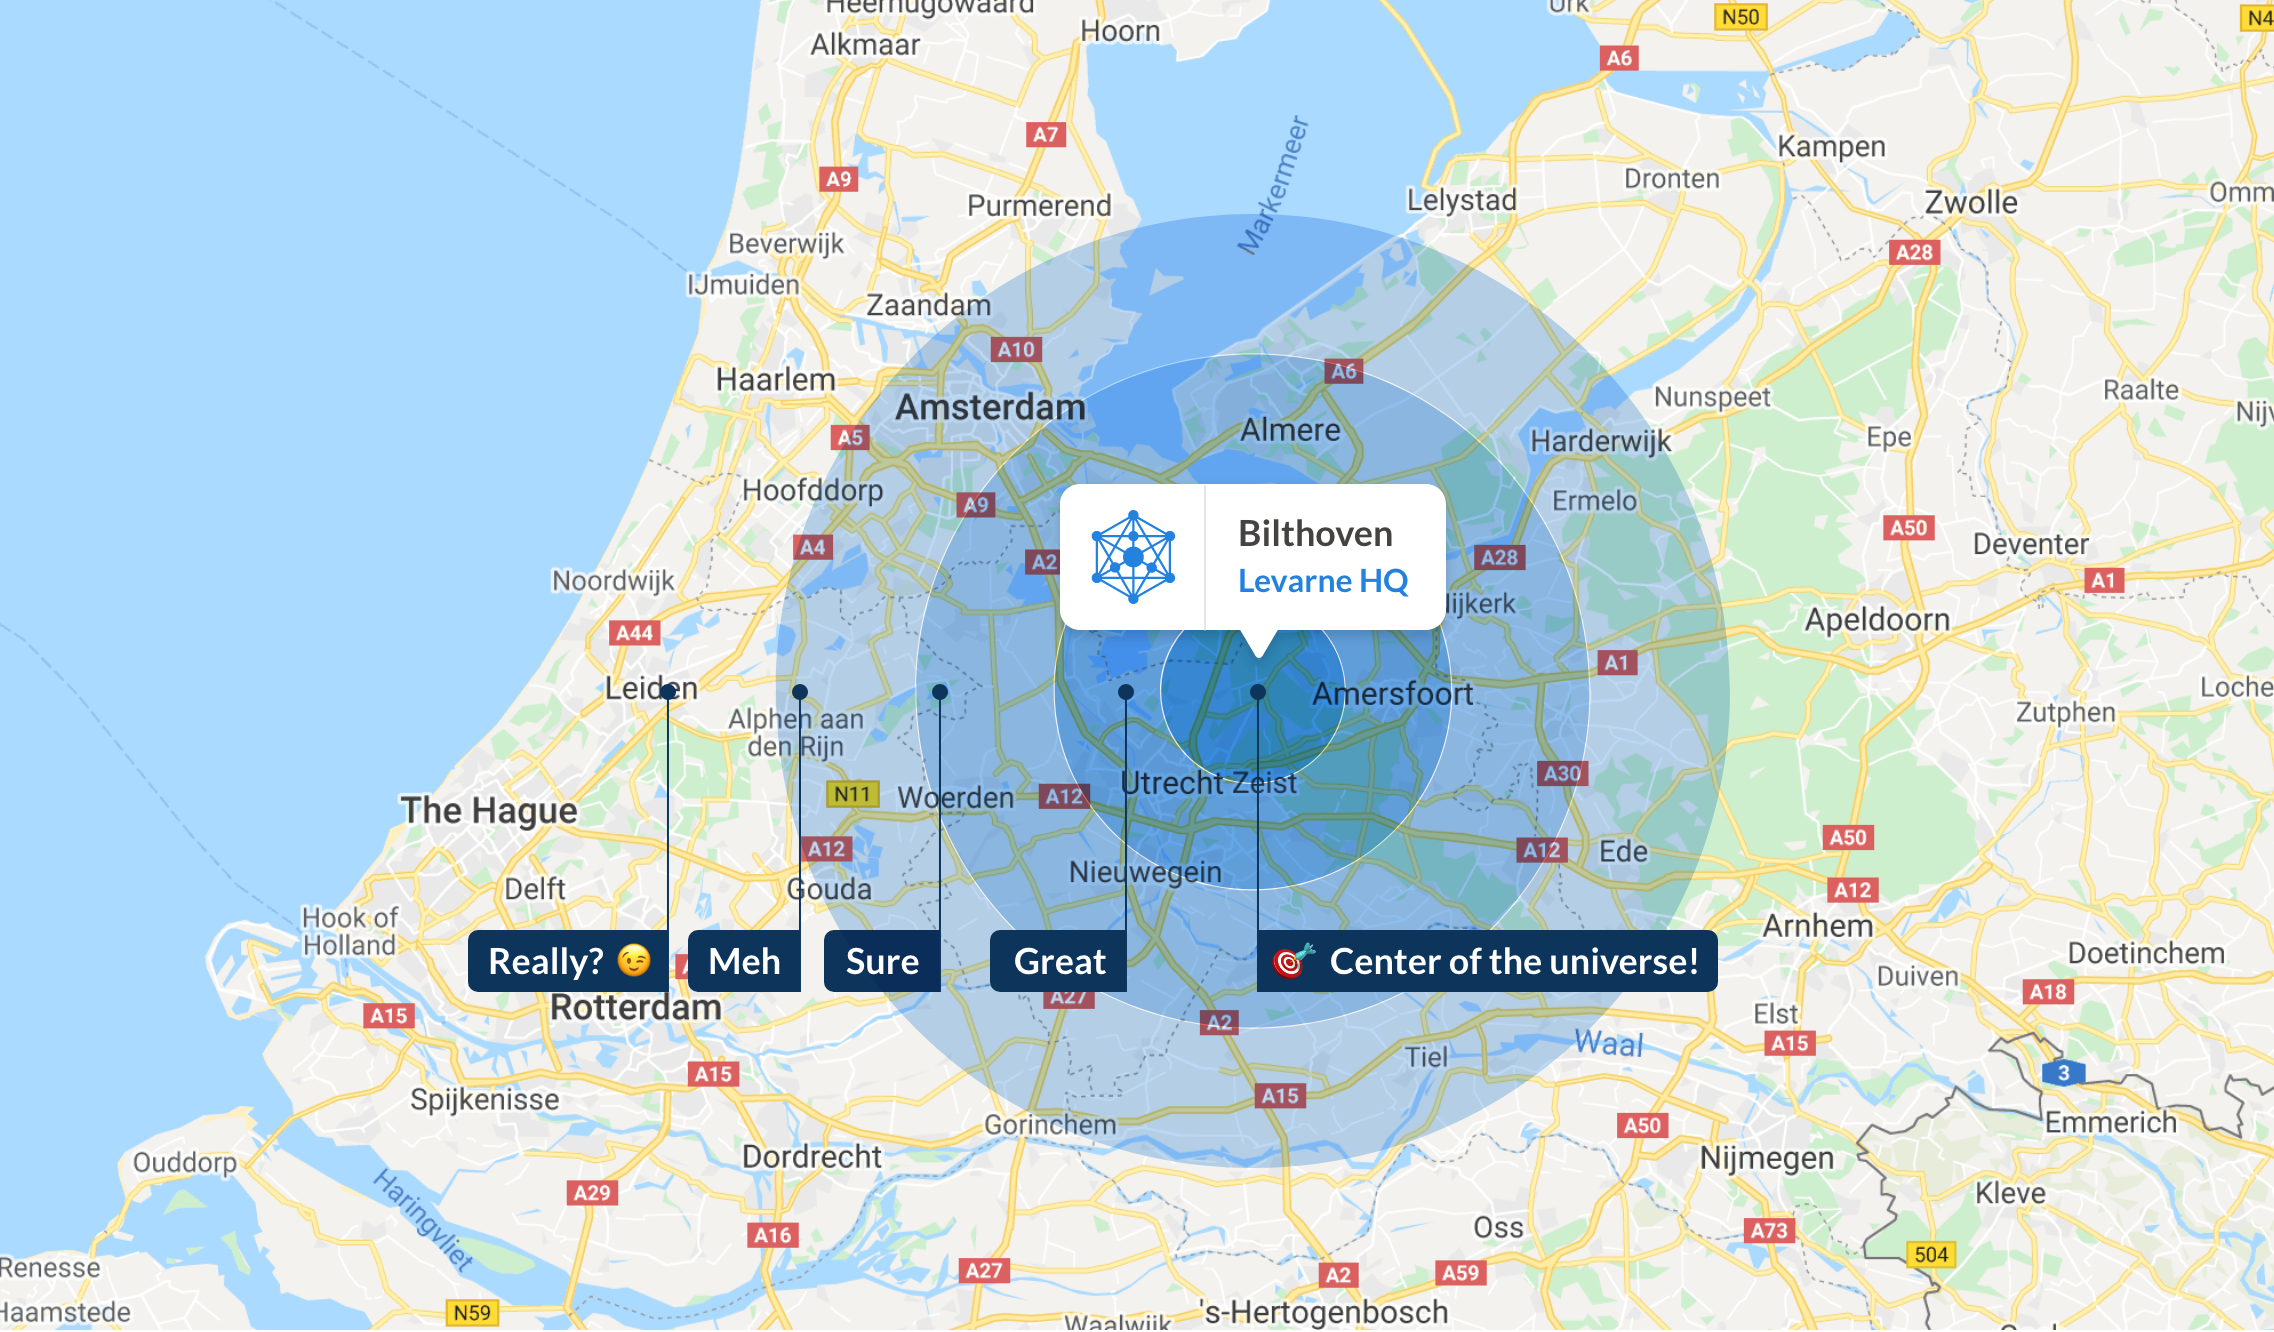 Map of the Netherlands with in the middle the headquarters of Levarne located in Bilthoven.